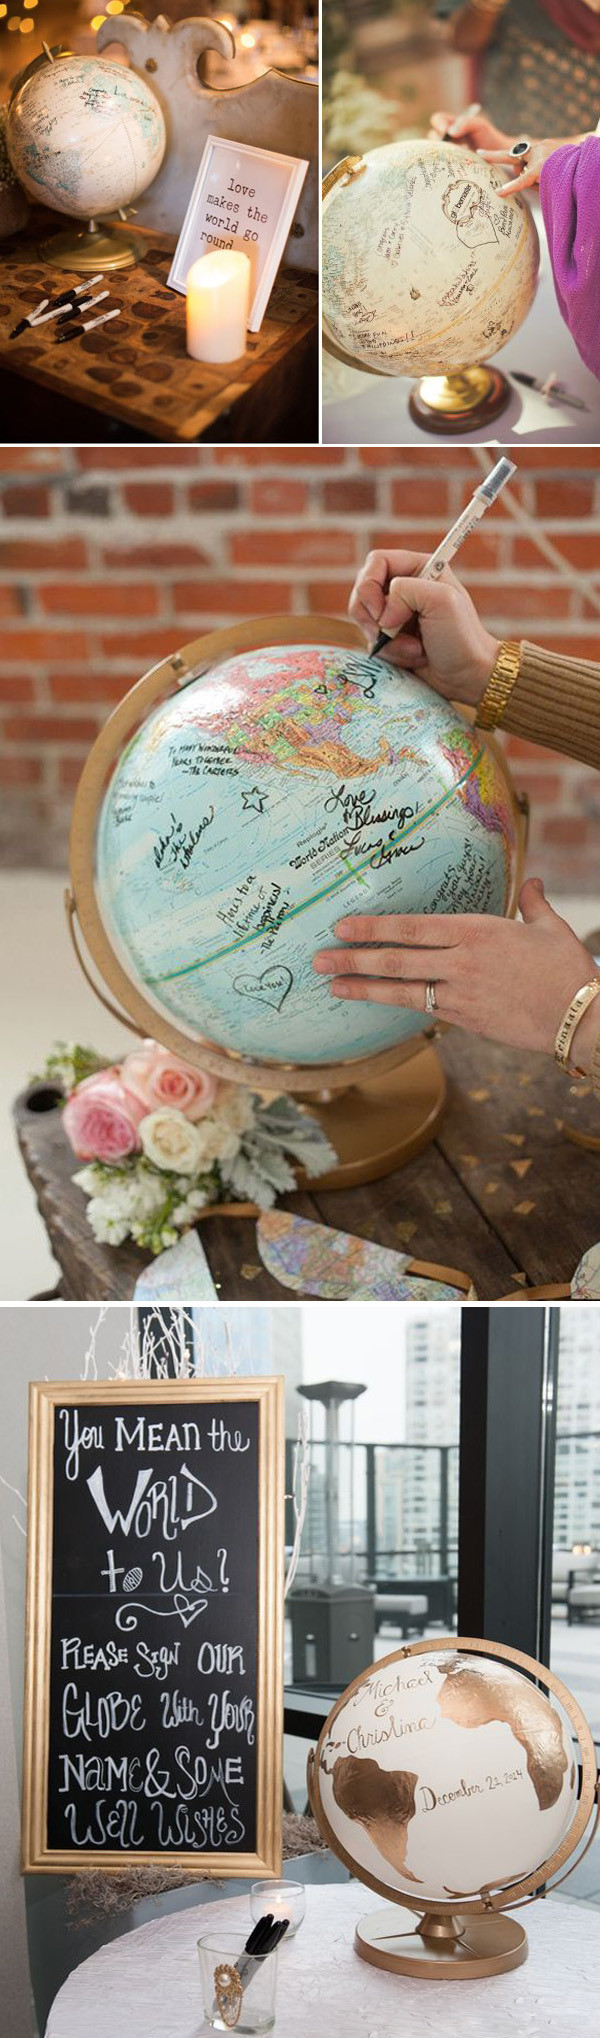 Cool Wedding Guest Books
 23 Unique Wedding Guest Book Ideas for Your Big Day Oh